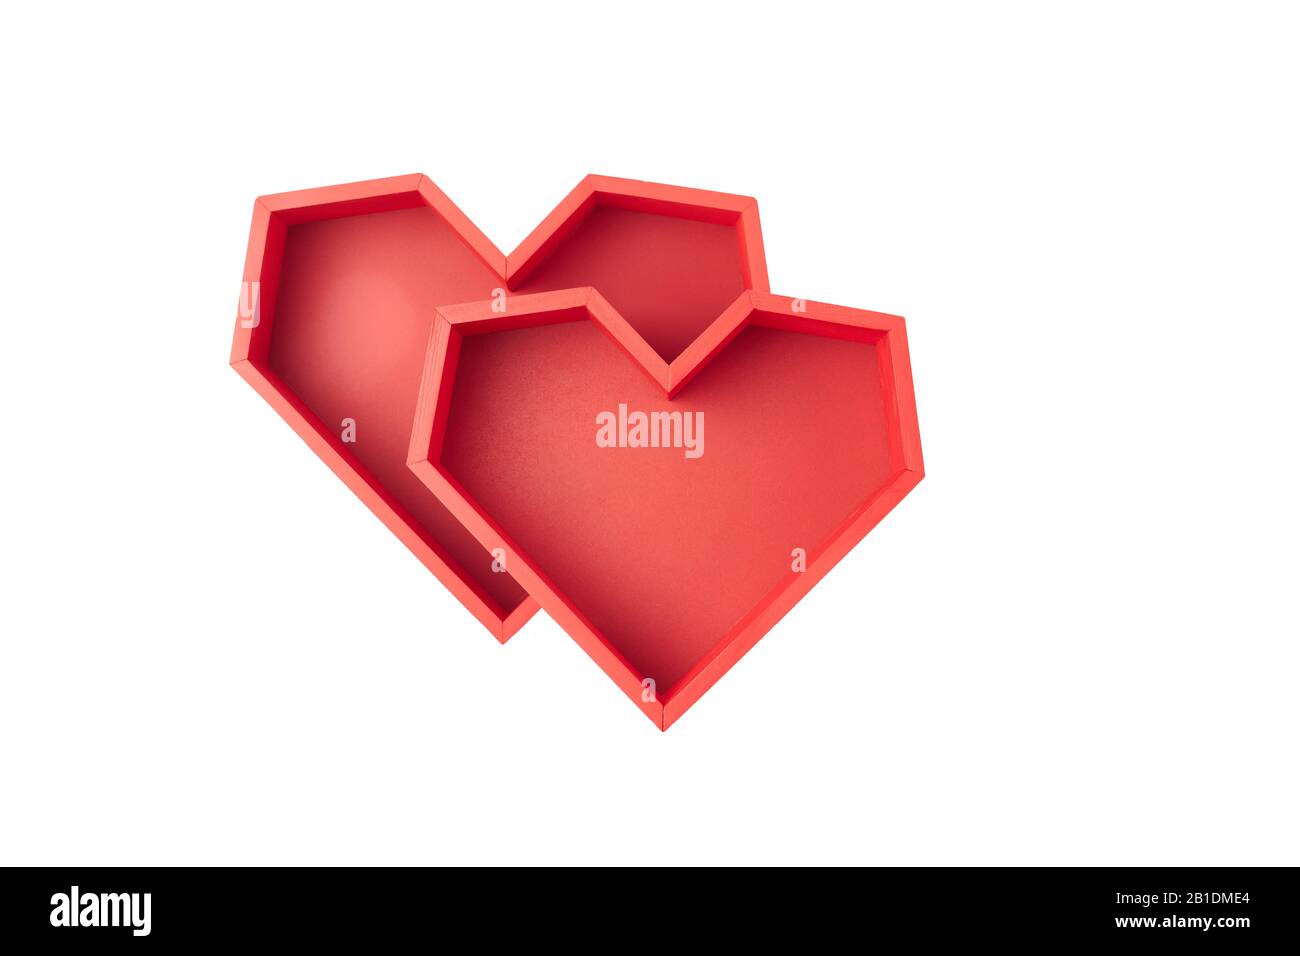 Two red empty boxes in the shape of faceted heart on a white background. Stock Photo